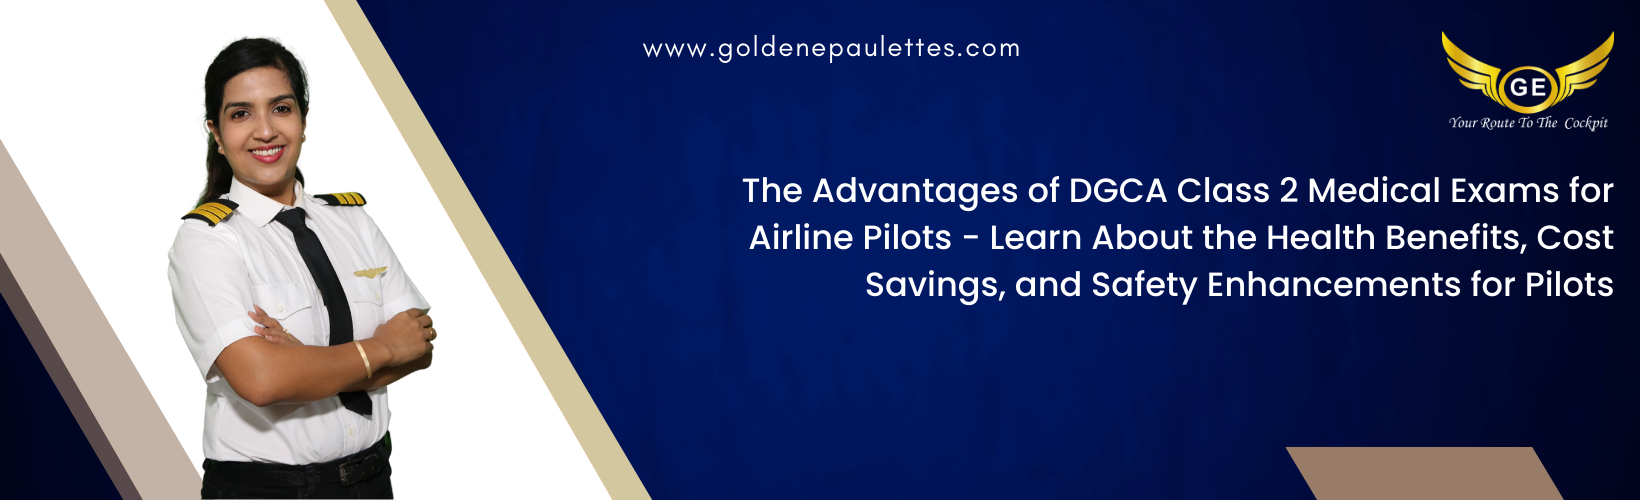 The Benefits of a DGCA Class 2 Medical Exam for Airline Pilots - This article will discuss the advantages that airline pilots get from obtaining a DGCA Class 2 Medical Exam. It will highlight the benefits to the pilot's health and safety, as well as the cost savings for airlines. (Reference